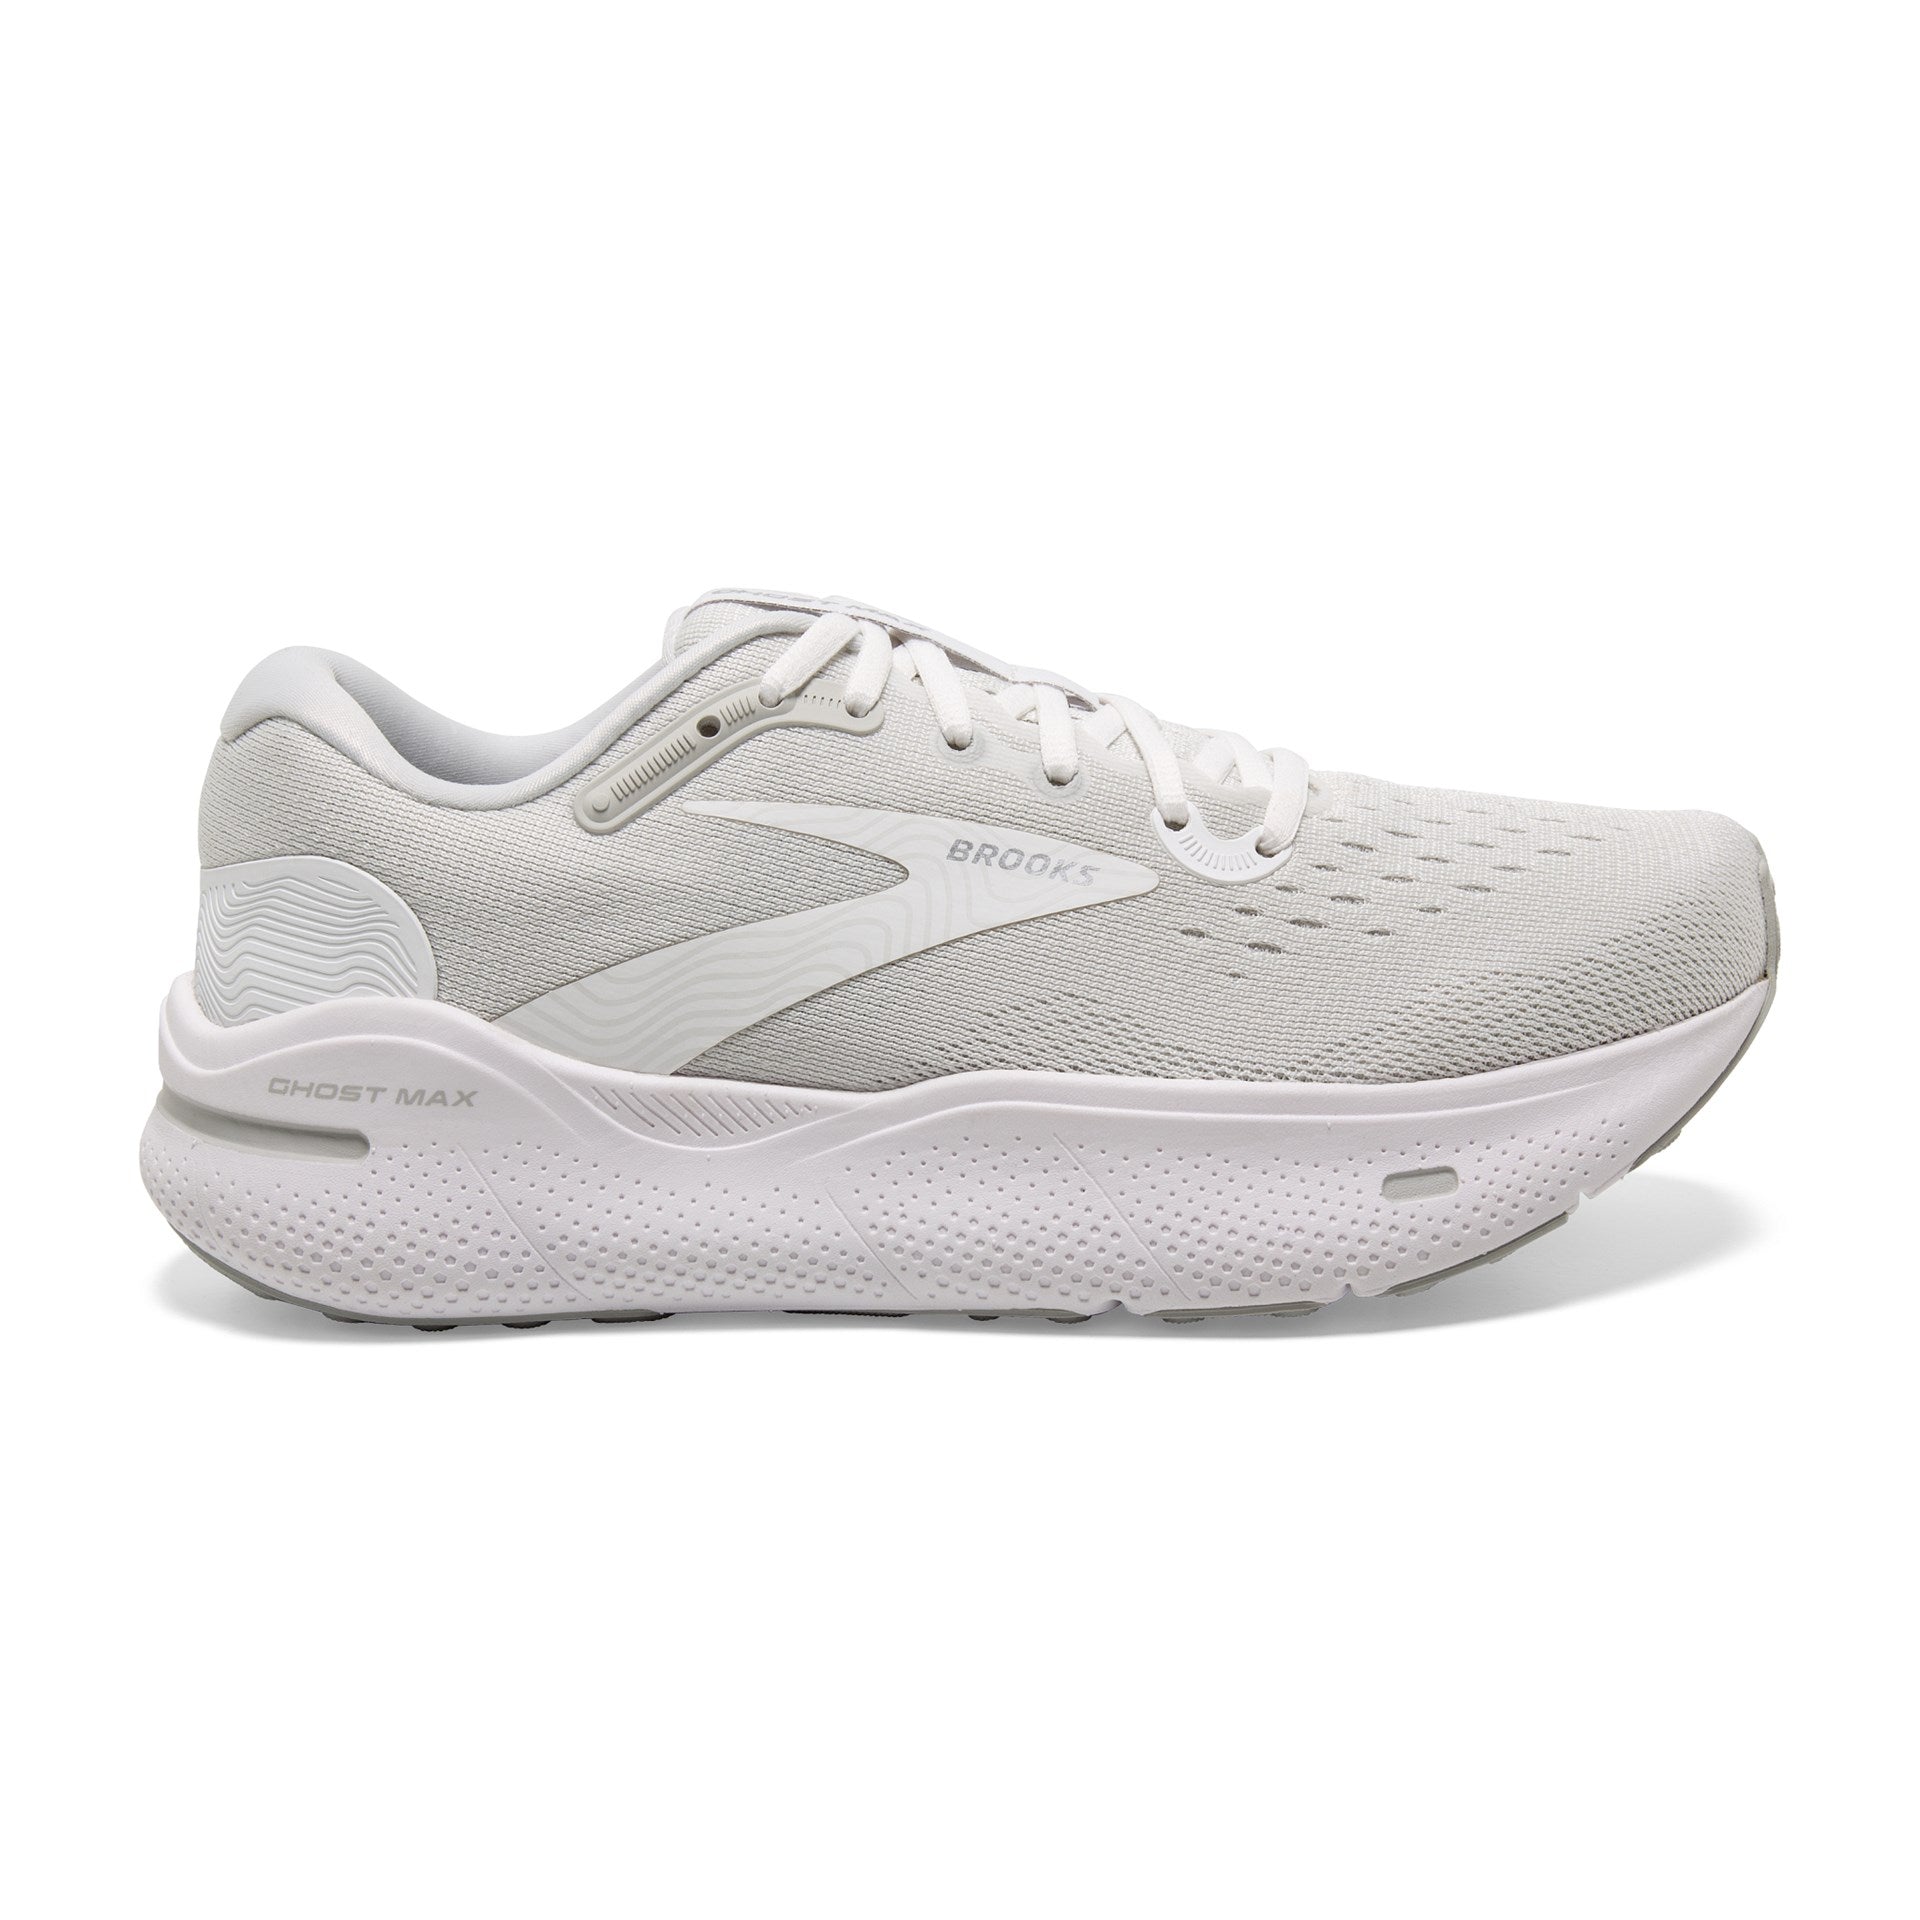 BROOKS WOMEN'S GHOST MAX - B - 124 WHITE/OYSTER 5.0